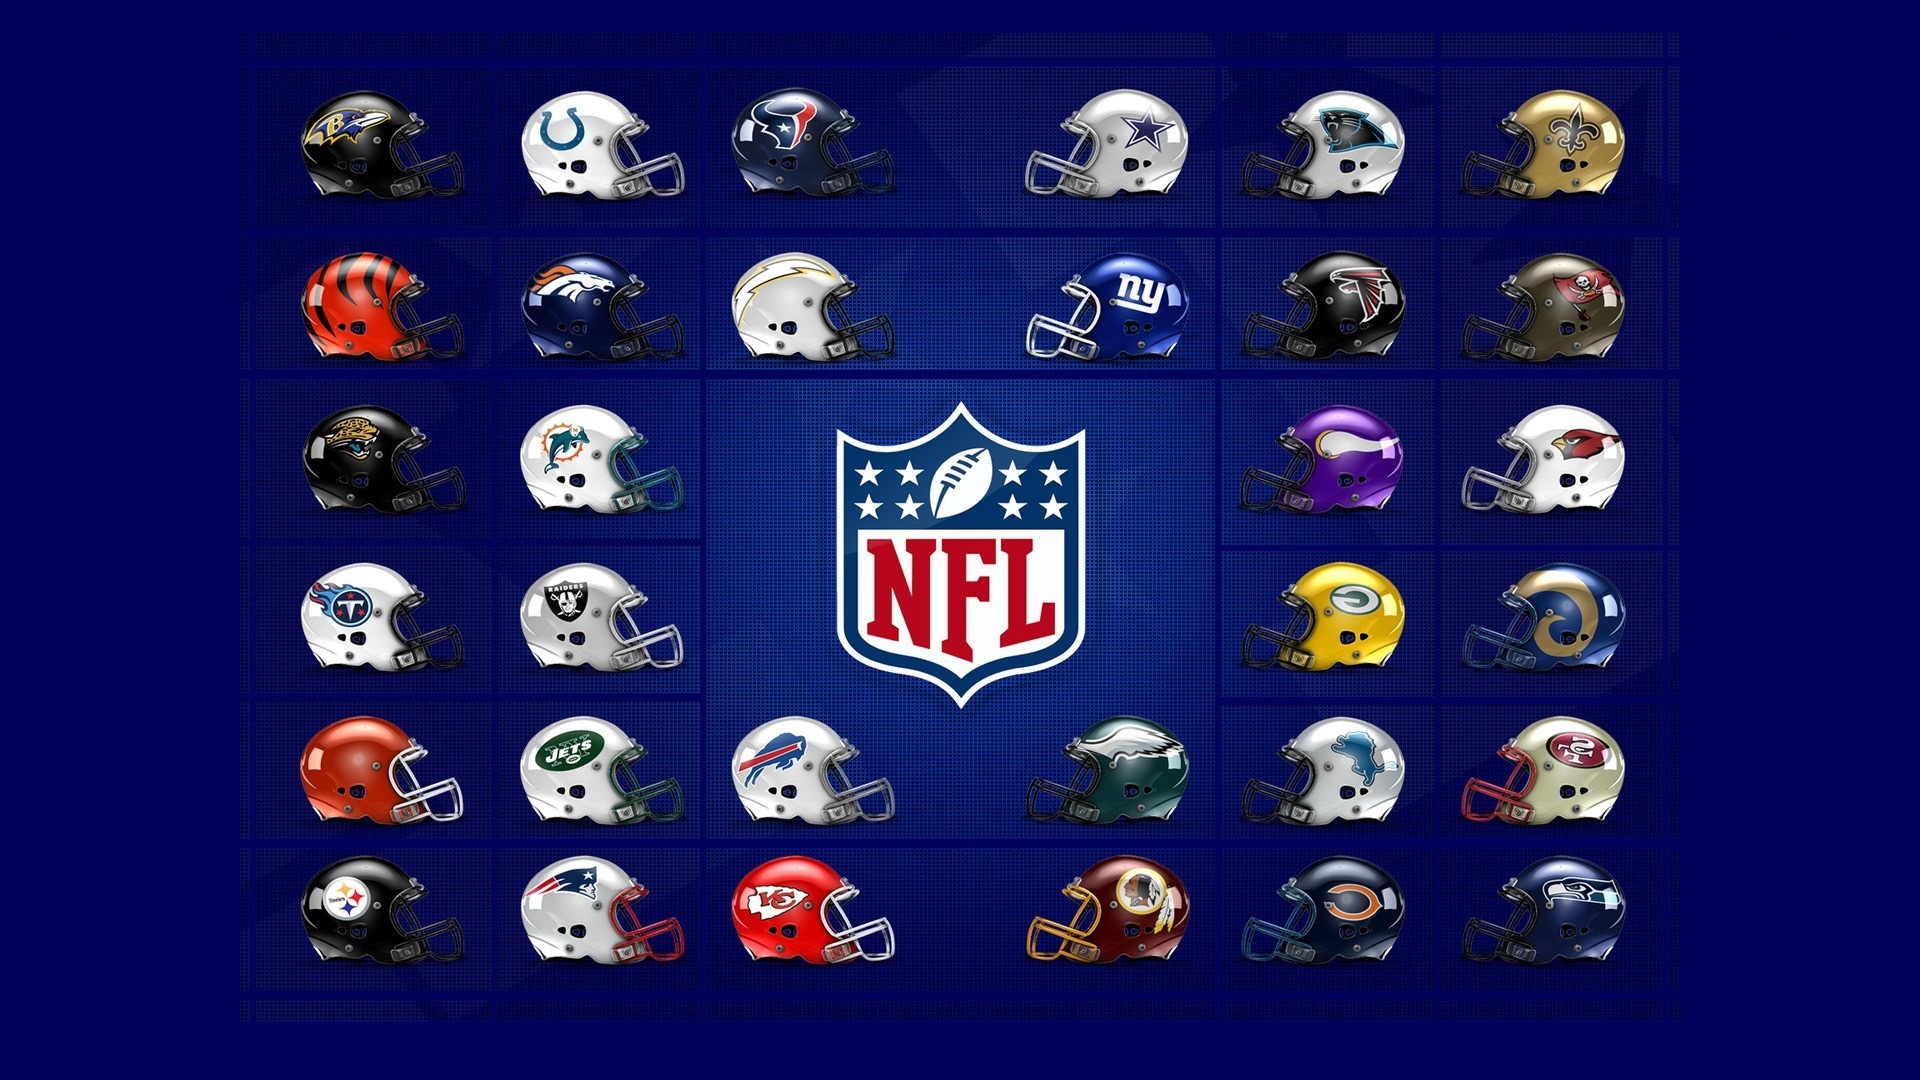 NFL Helmets Wallpaper With high-resolution 1920X1080 pixel. You can use this wallpaper for your Mac or Windows Desktop Background, iPhone, Android or Tablet and another Smartphone device